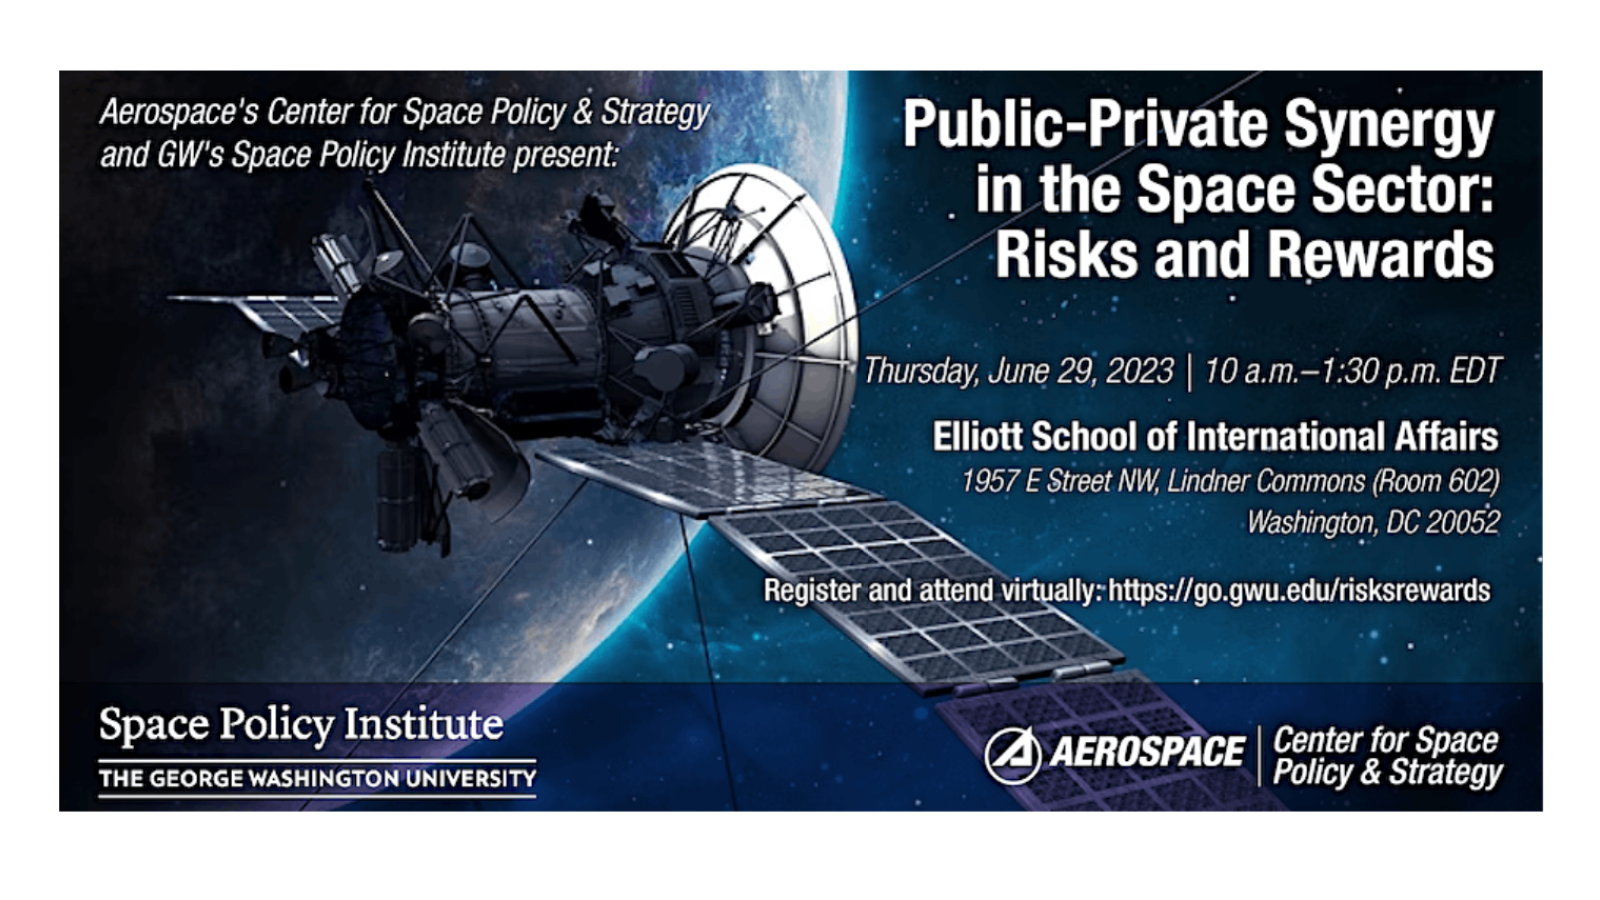 Public-Private Synergy in the Space Sector: Risks and Rewards